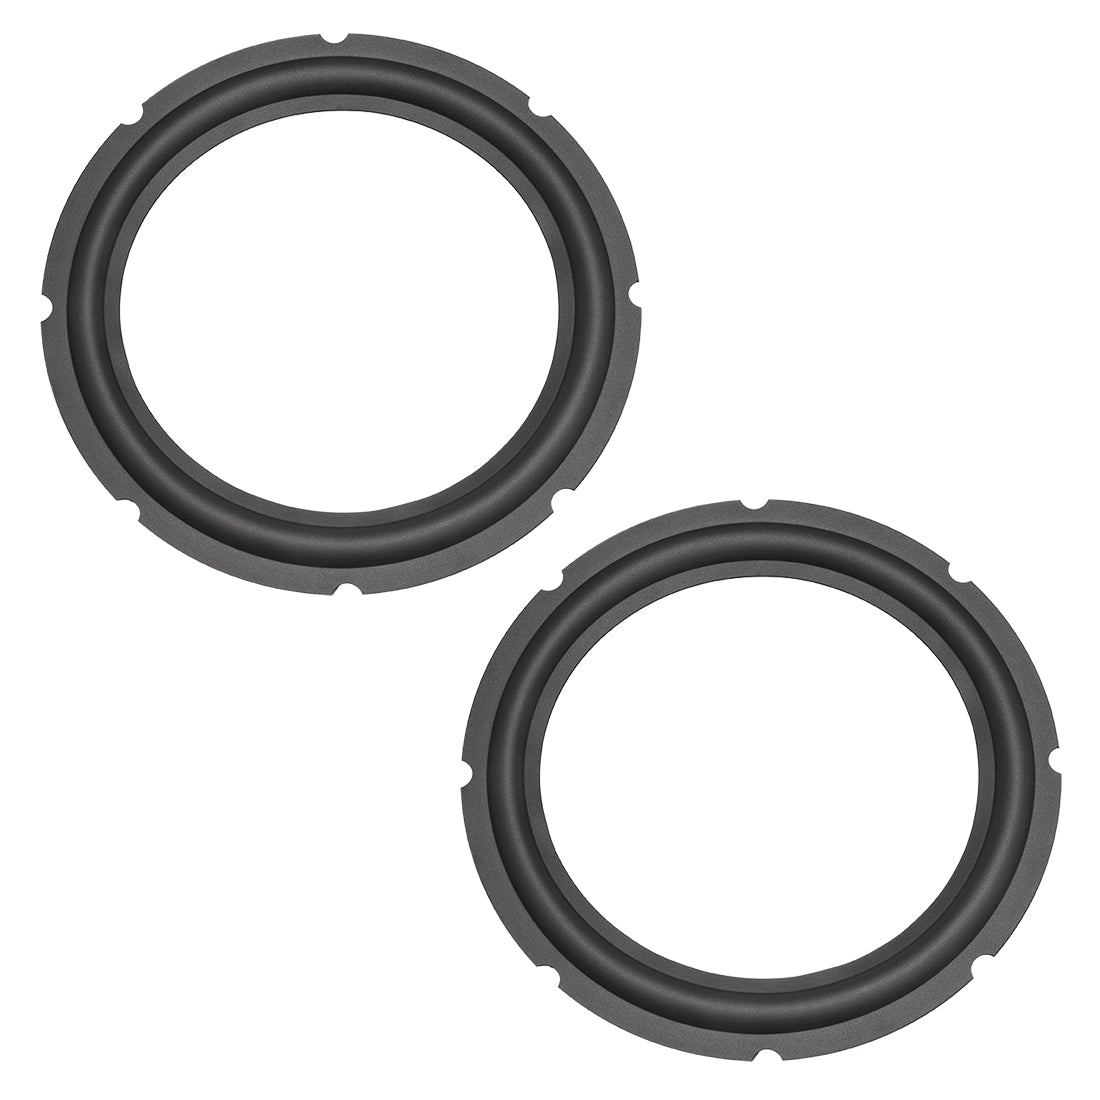 uxcell Uxcell 10" 10inch Perforated Rubber Speaker Edge Surround Rings Replacement Part for Speaker Repair or DIY 2pcs